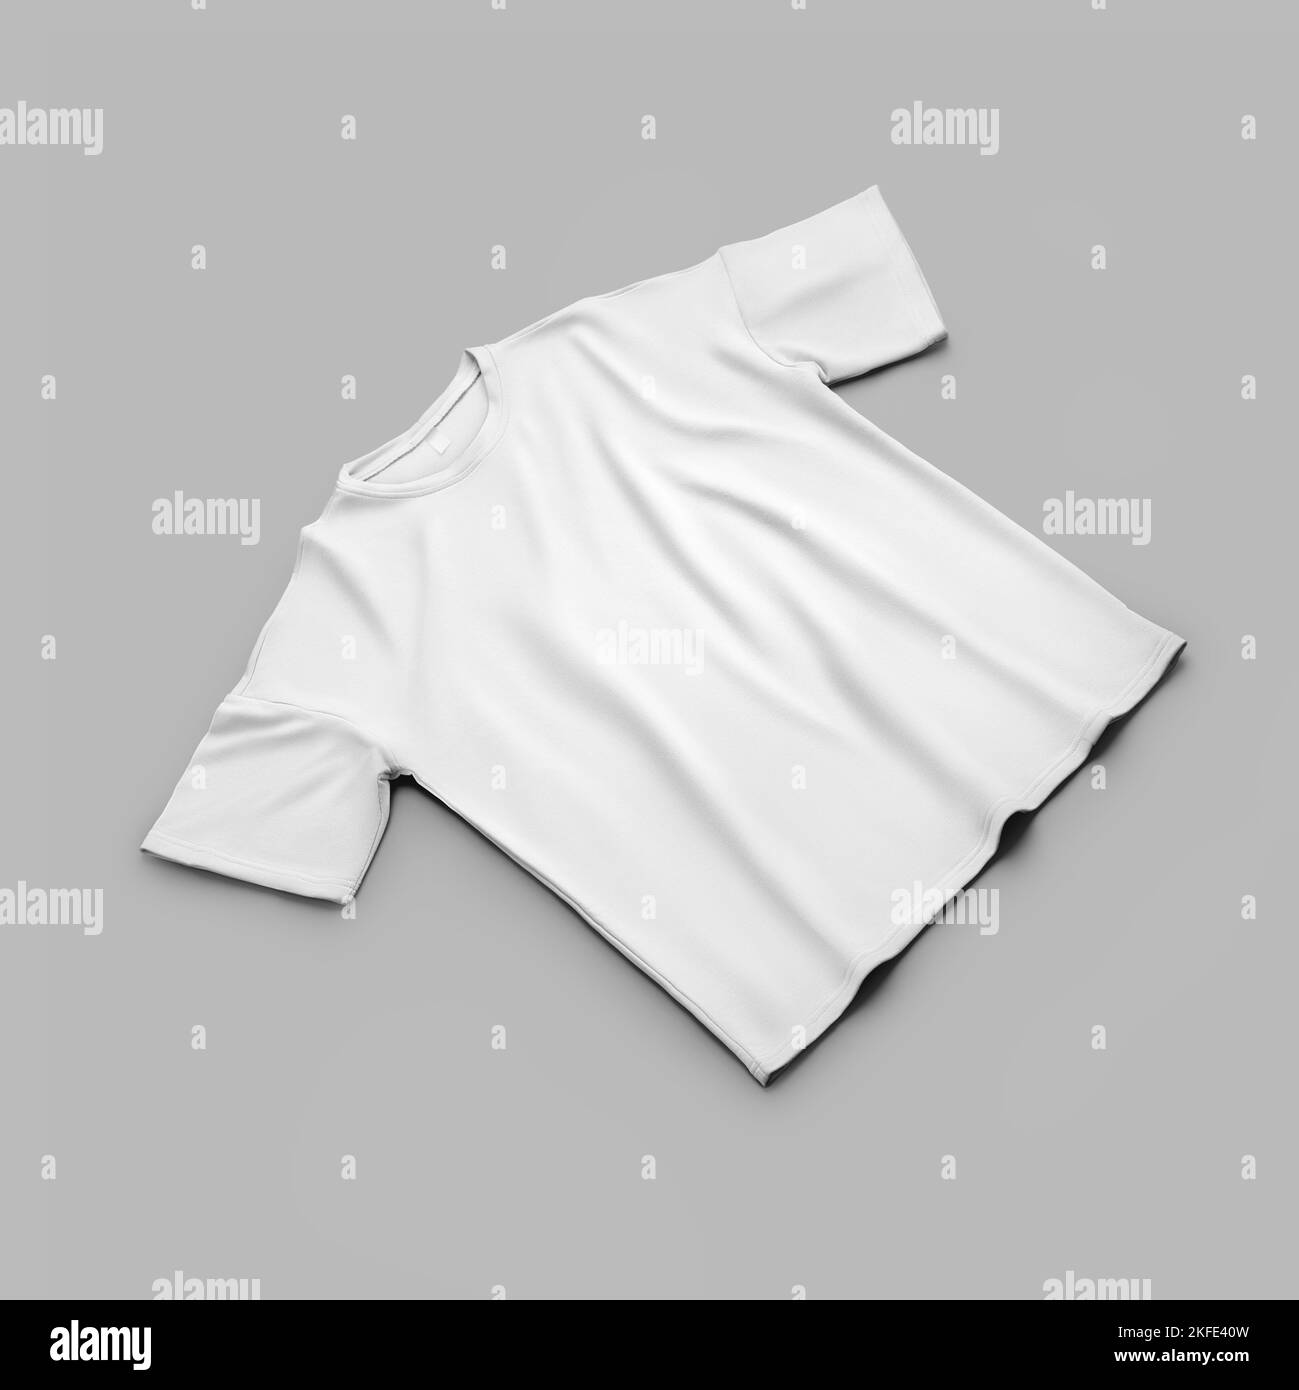 Mockup of an oversized white t-shirt with a round neck, presentation diagonally, isolated on the background, front view. Fashionable casual apparel te Stock Photo